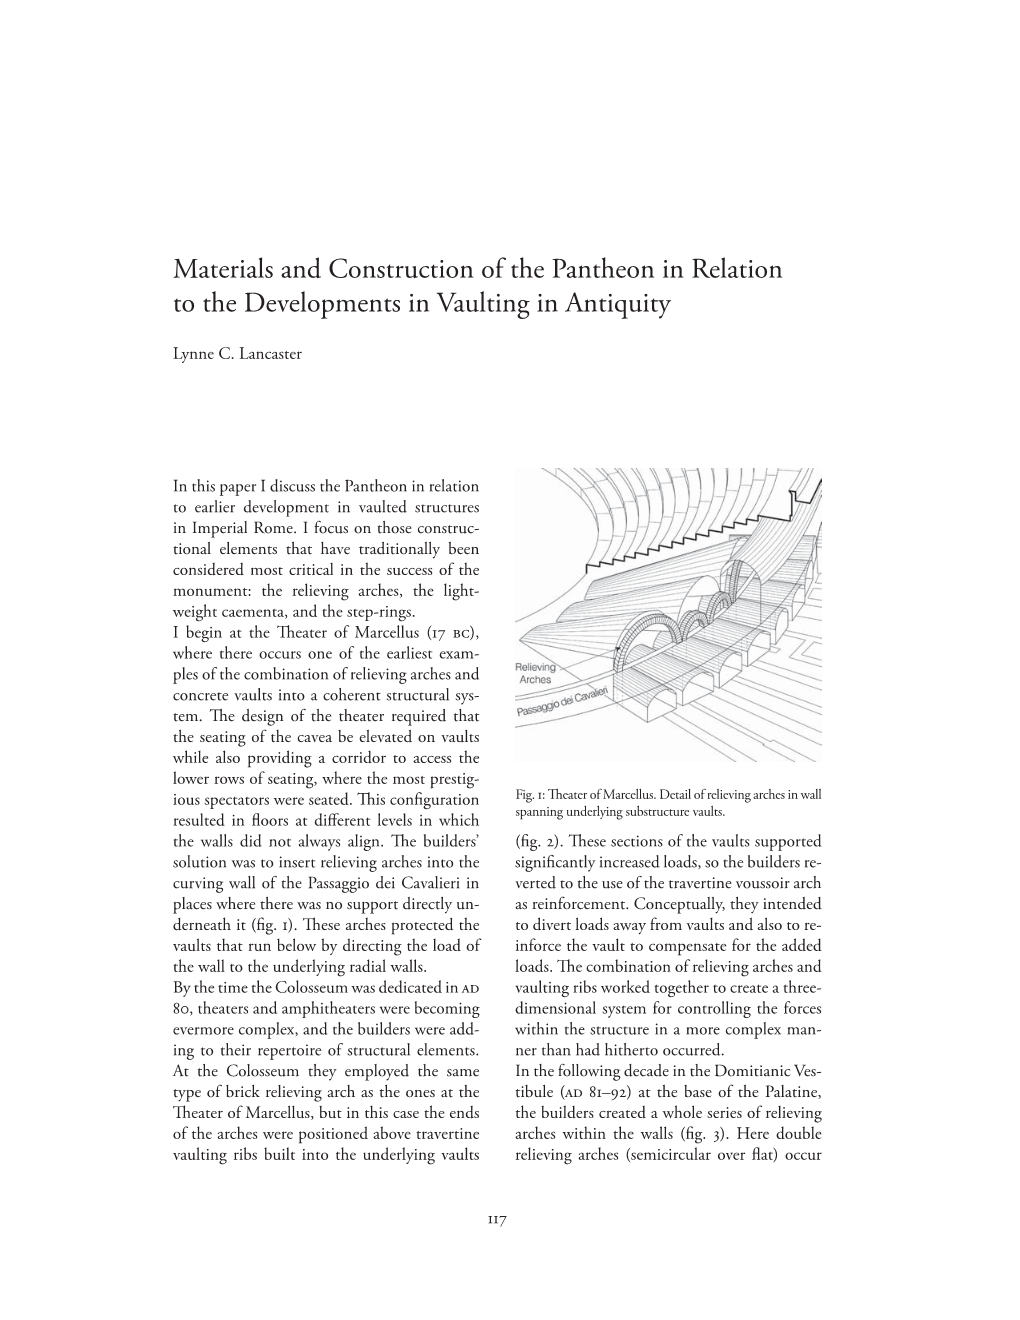 Materials and Construction of the Pantheon in Relation to the Developments in Vaulting in Antiquity